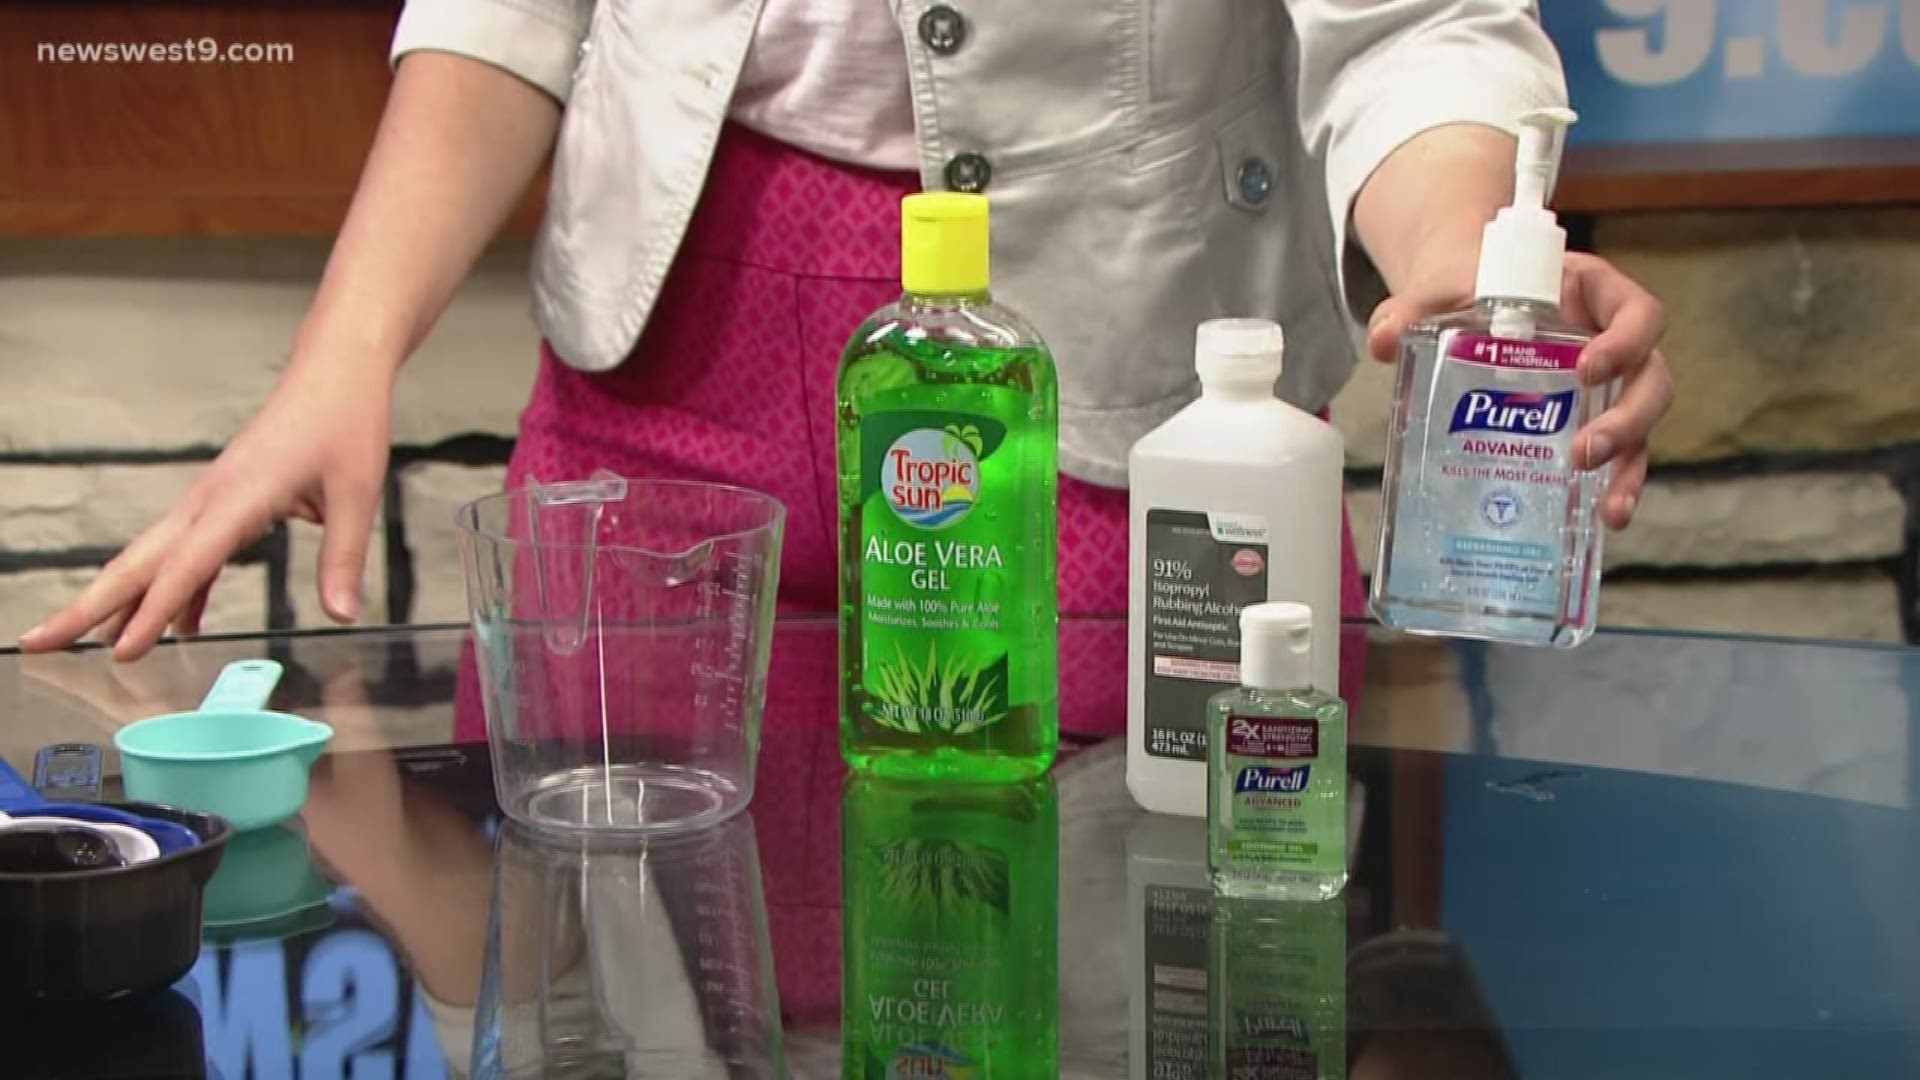 These two ingredients are aloe vera and isopropyl alcohol.